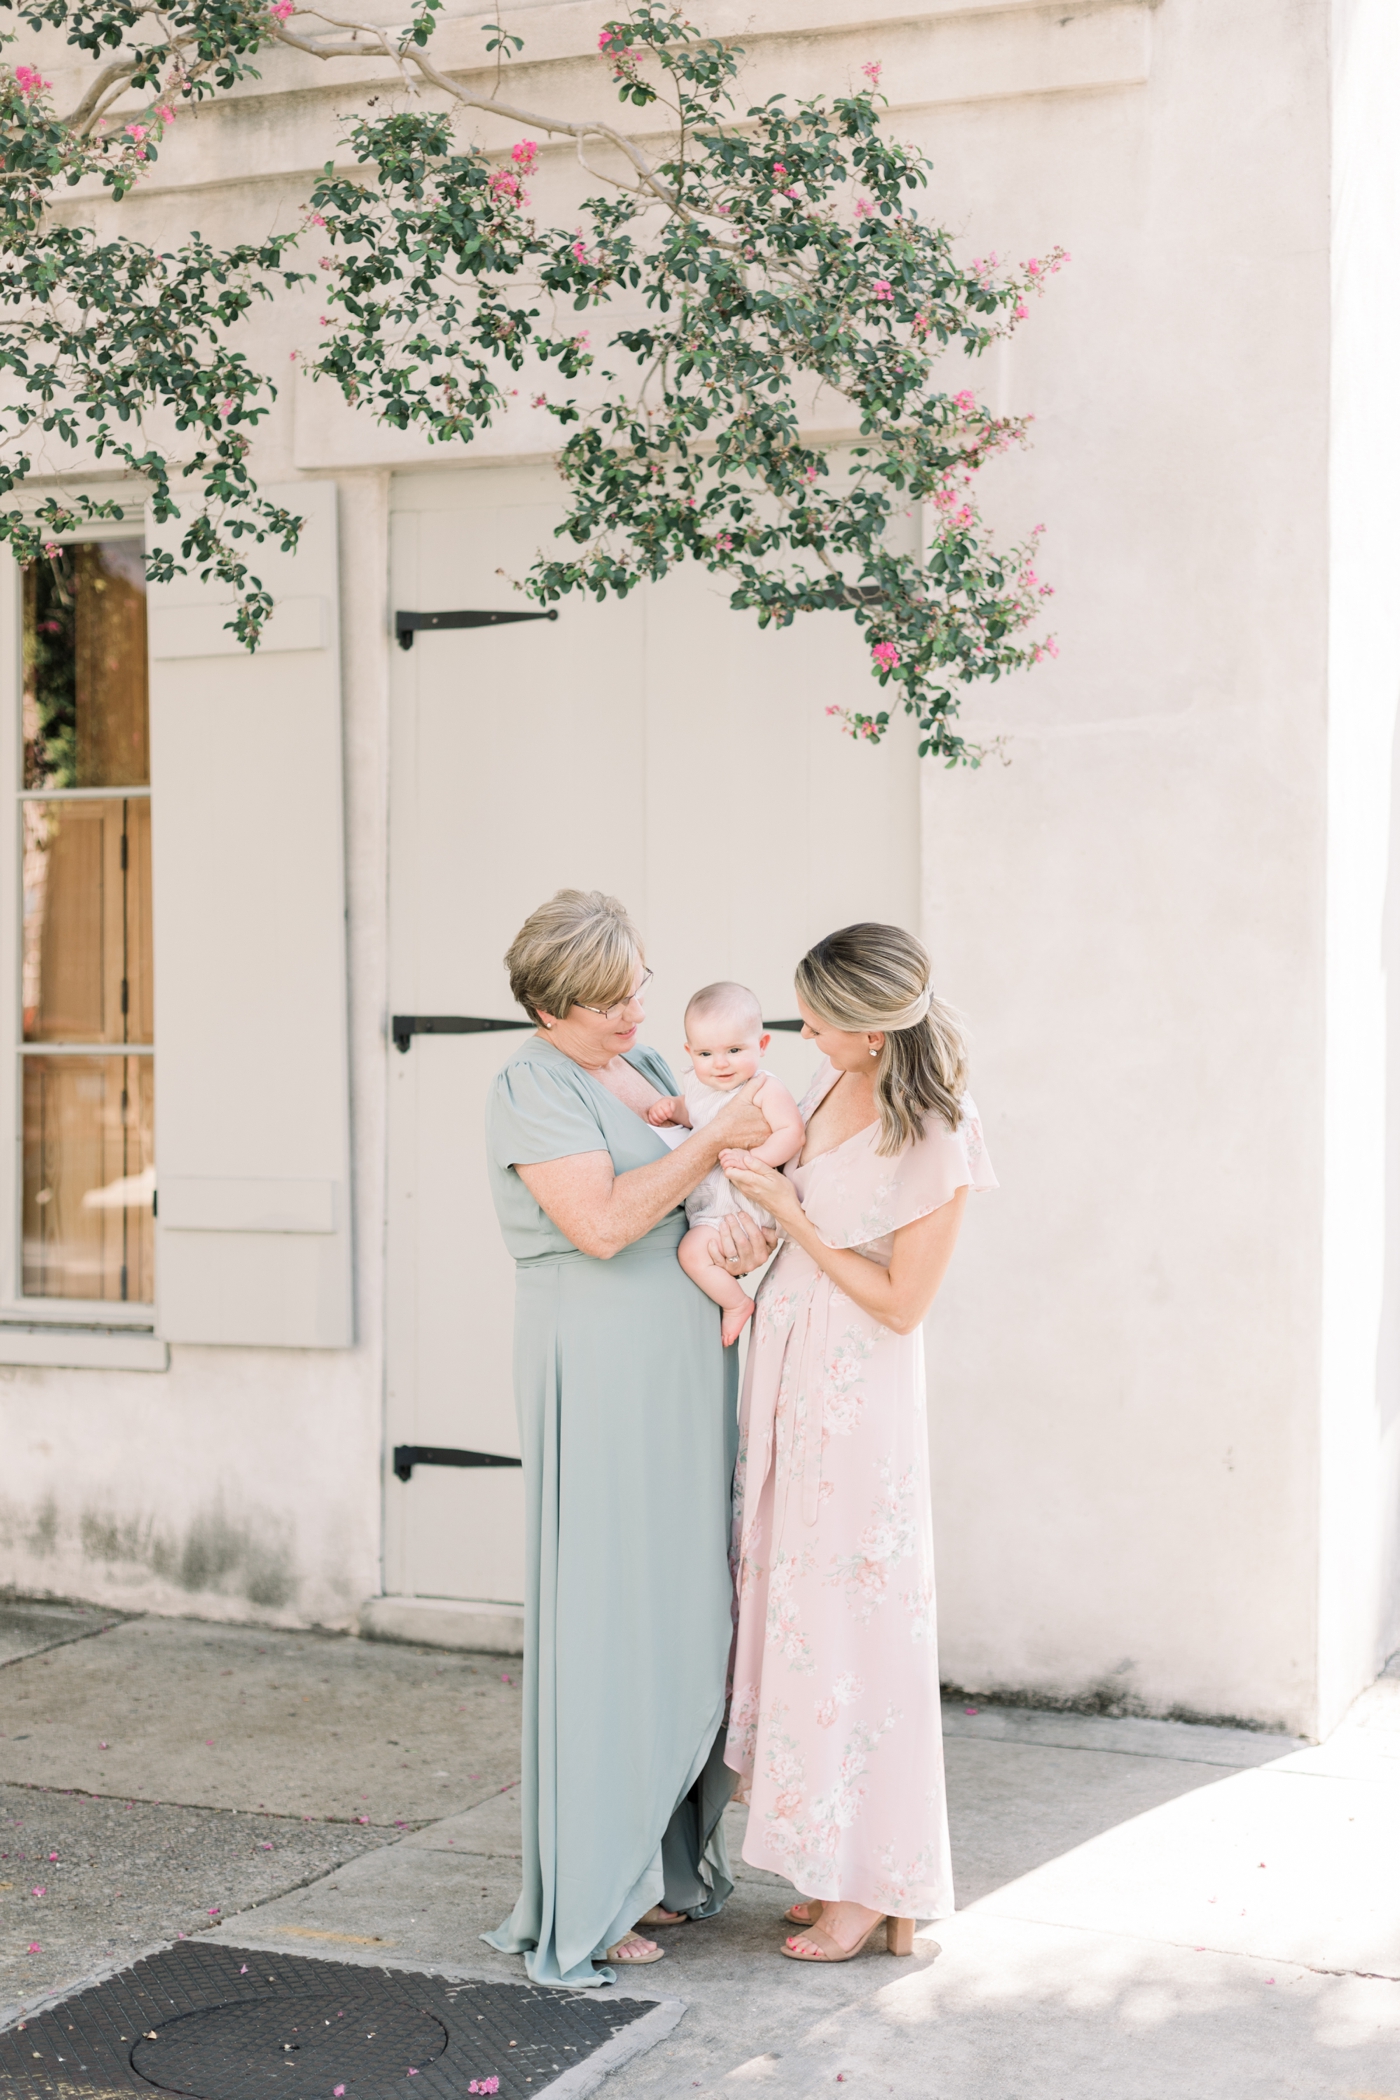 Grandma with daughter and granddaughter in motherhood mini session. Photo by Caitlyn Motycka Photography.